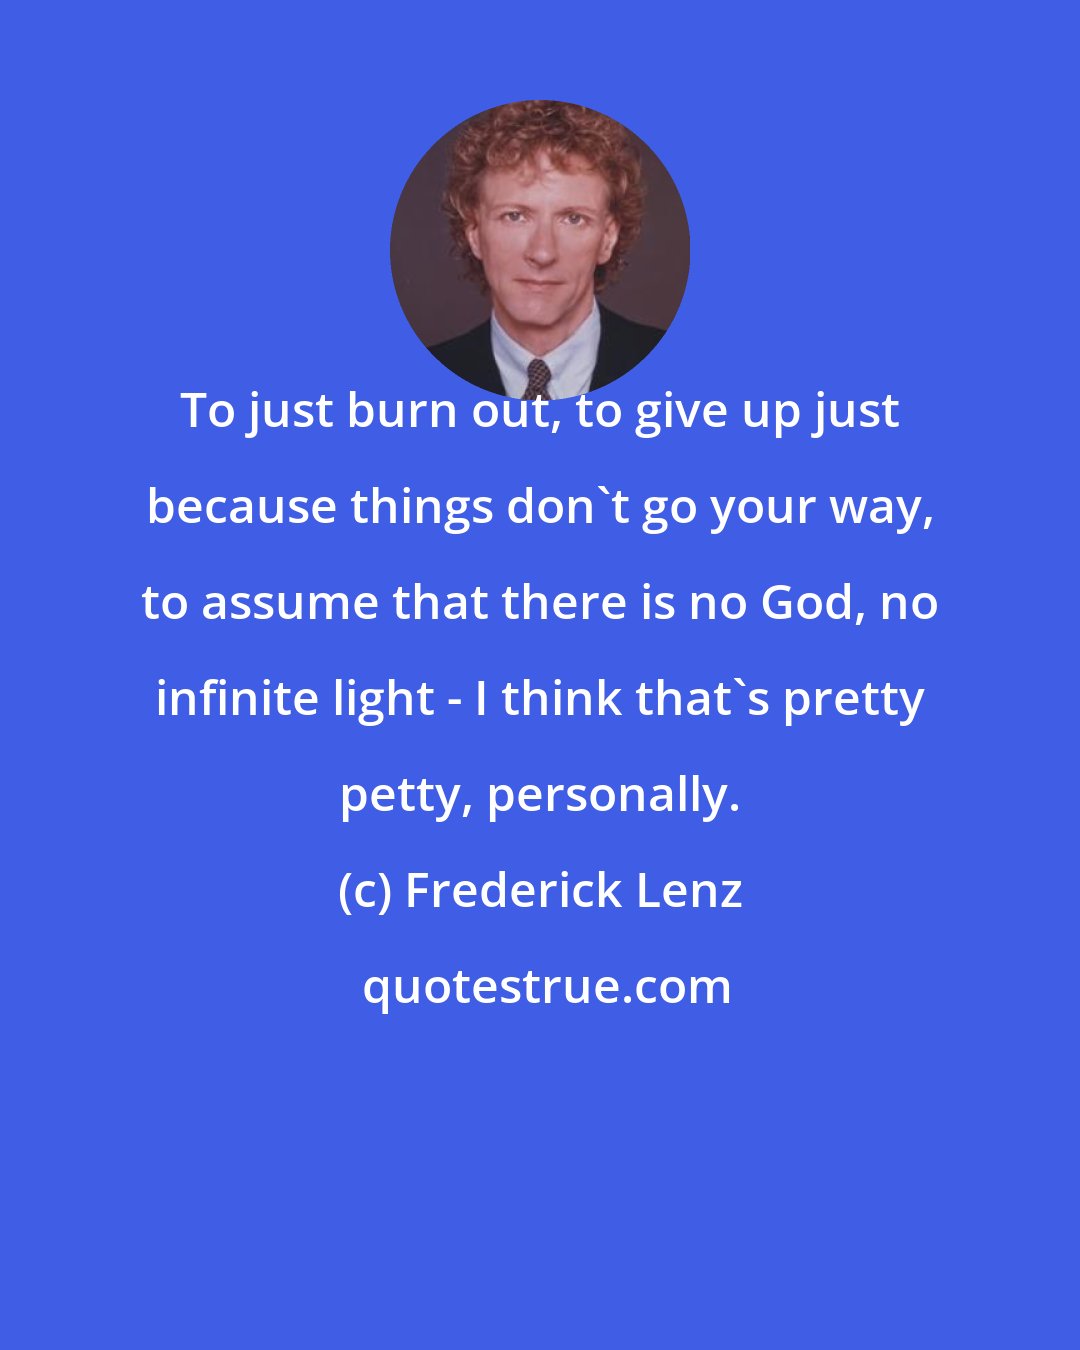 Frederick Lenz: To just burn out, to give up just because things don't go your way, to assume that there is no God, no infinite light - I think that's pretty petty, personally.